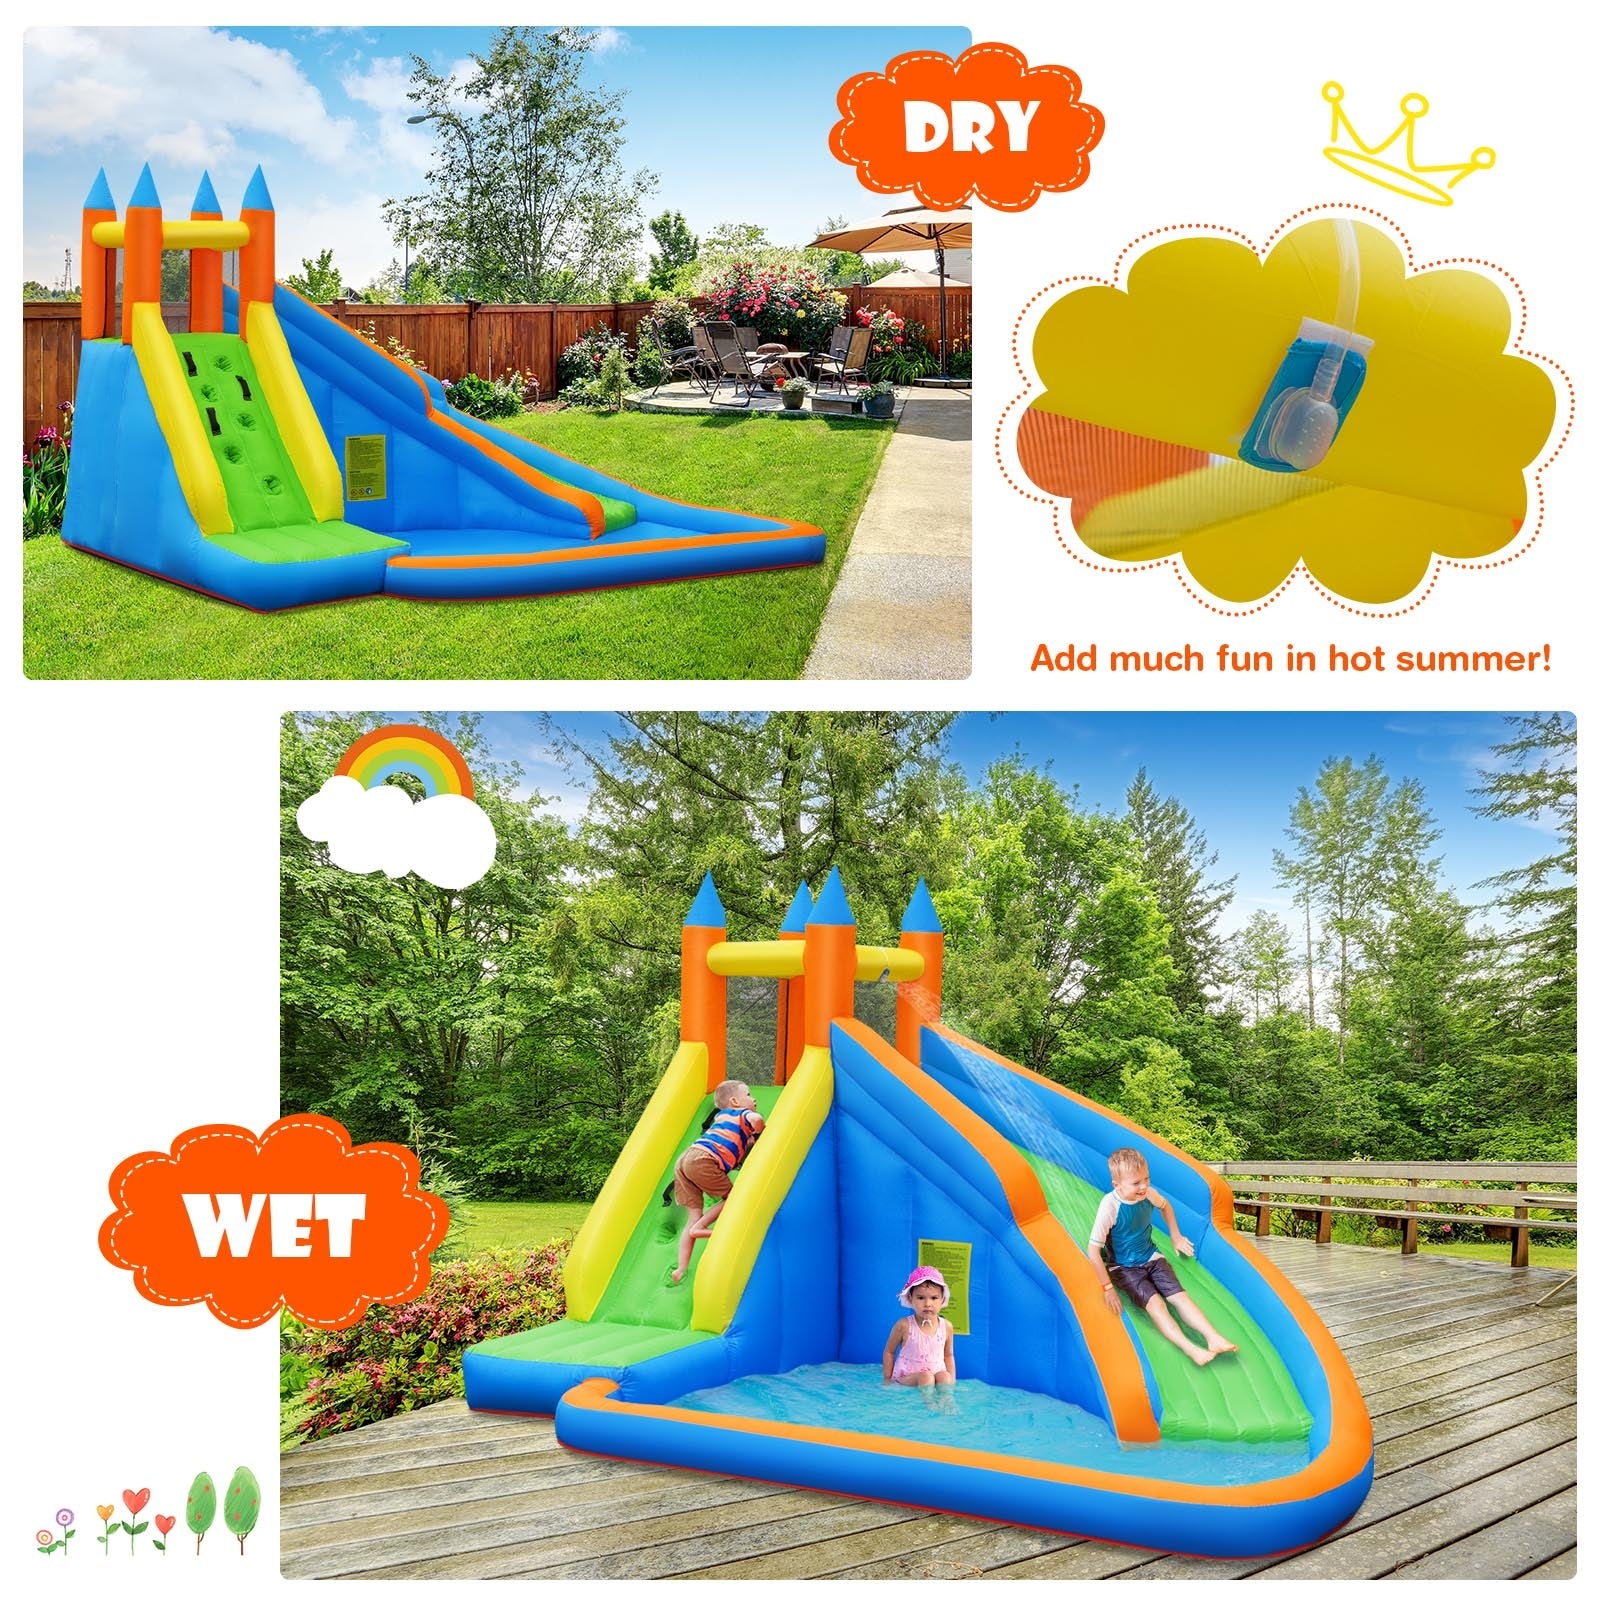 Dive into water-filled fun: Simply connect the hose to a tap and use a recommended air blower to infuse the water slide with endless excitement for your kids. The spray hood located at the top of the water slide keeps the sliding surface continuously slippery, adding to the aquatic fun.